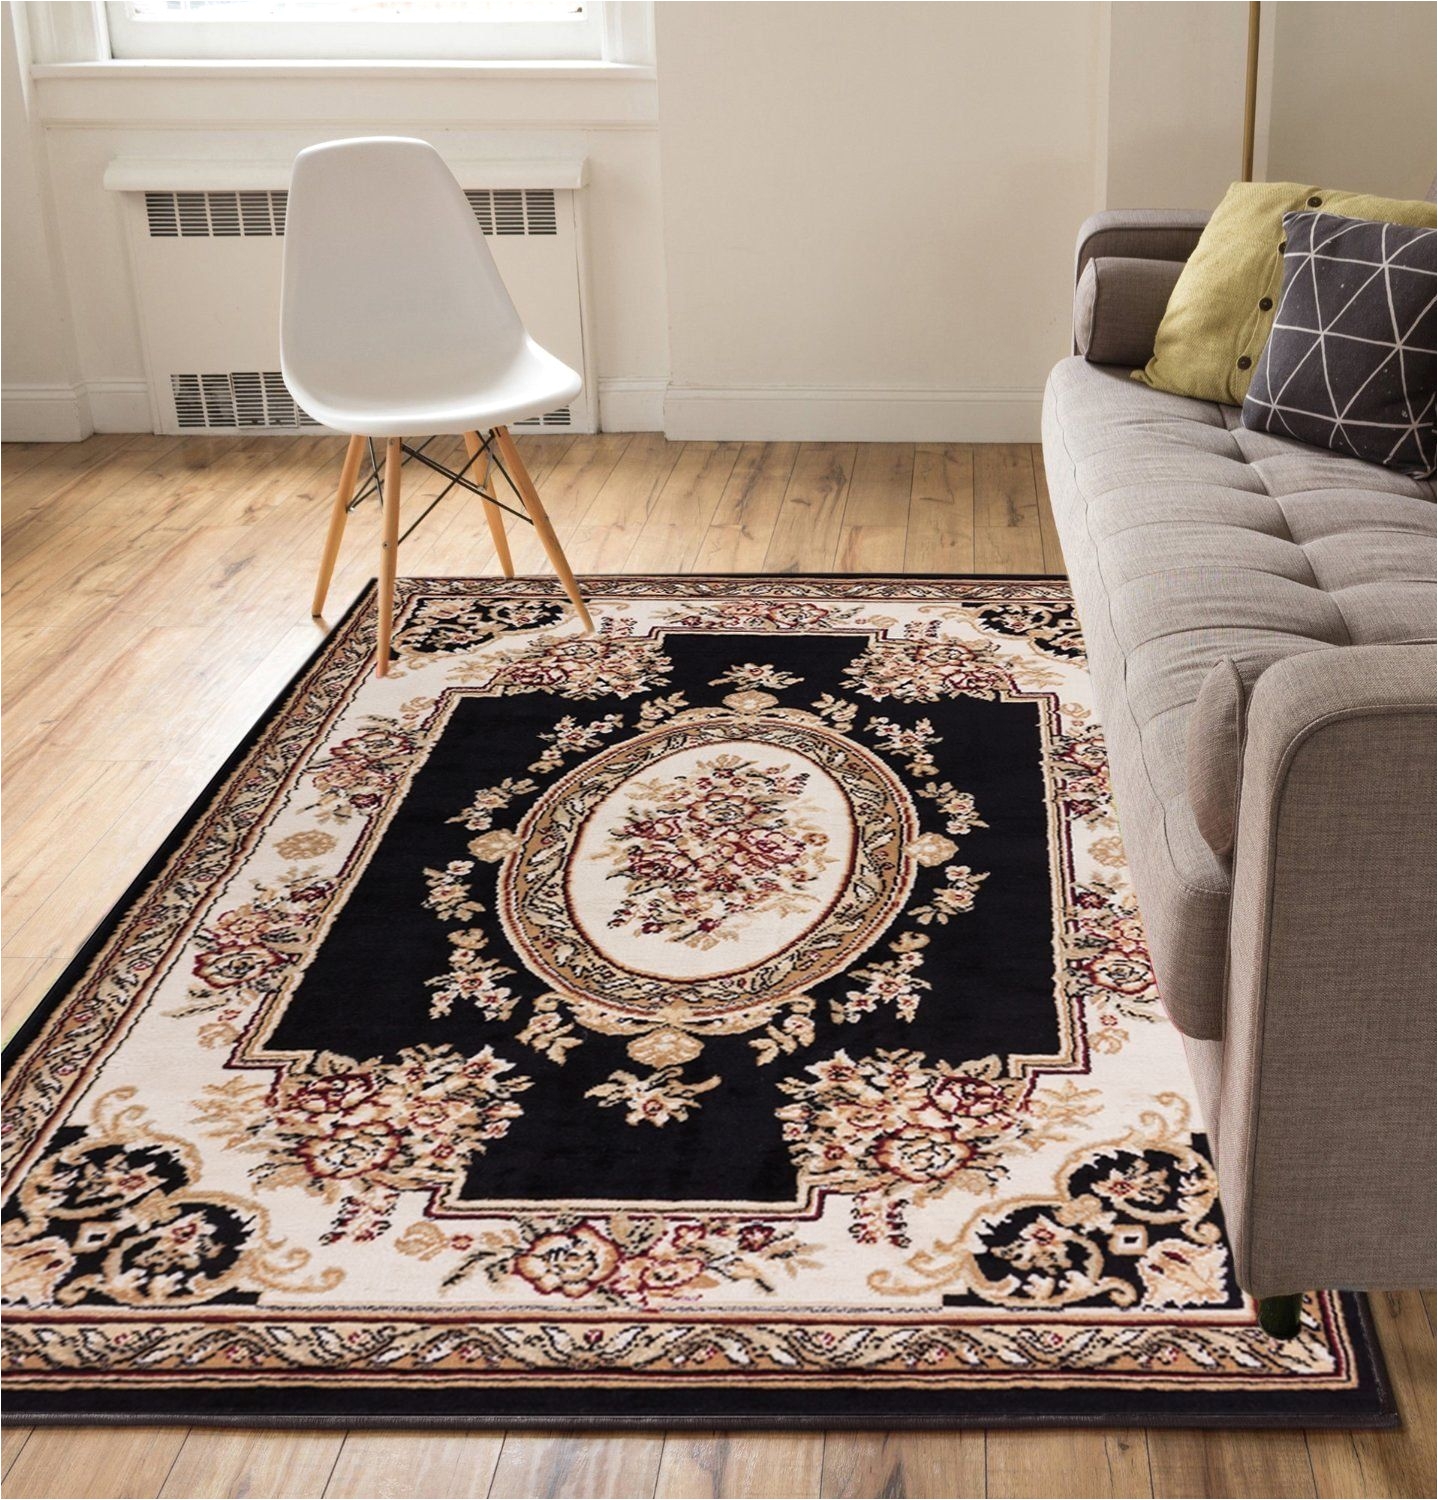 amazon com chantilly medallion black 5x7 5 3 x 7 3 traditional european floral border thin value area rug perfect for living room dining roo